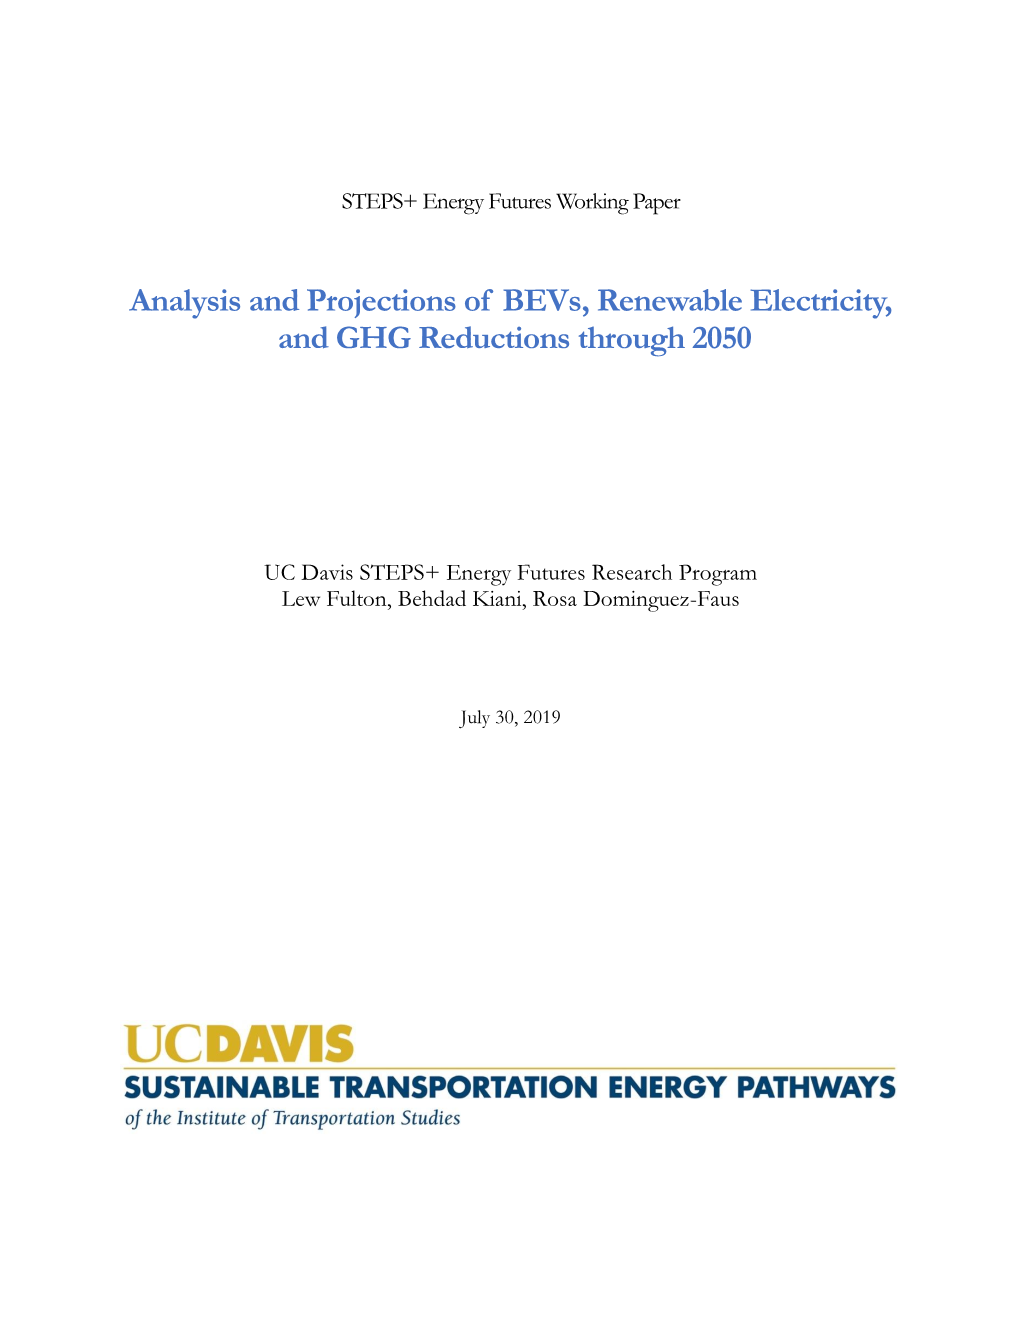 Analysis and Projections of Bevs, Renewable Electricity, and GHG Reductions Through 2050